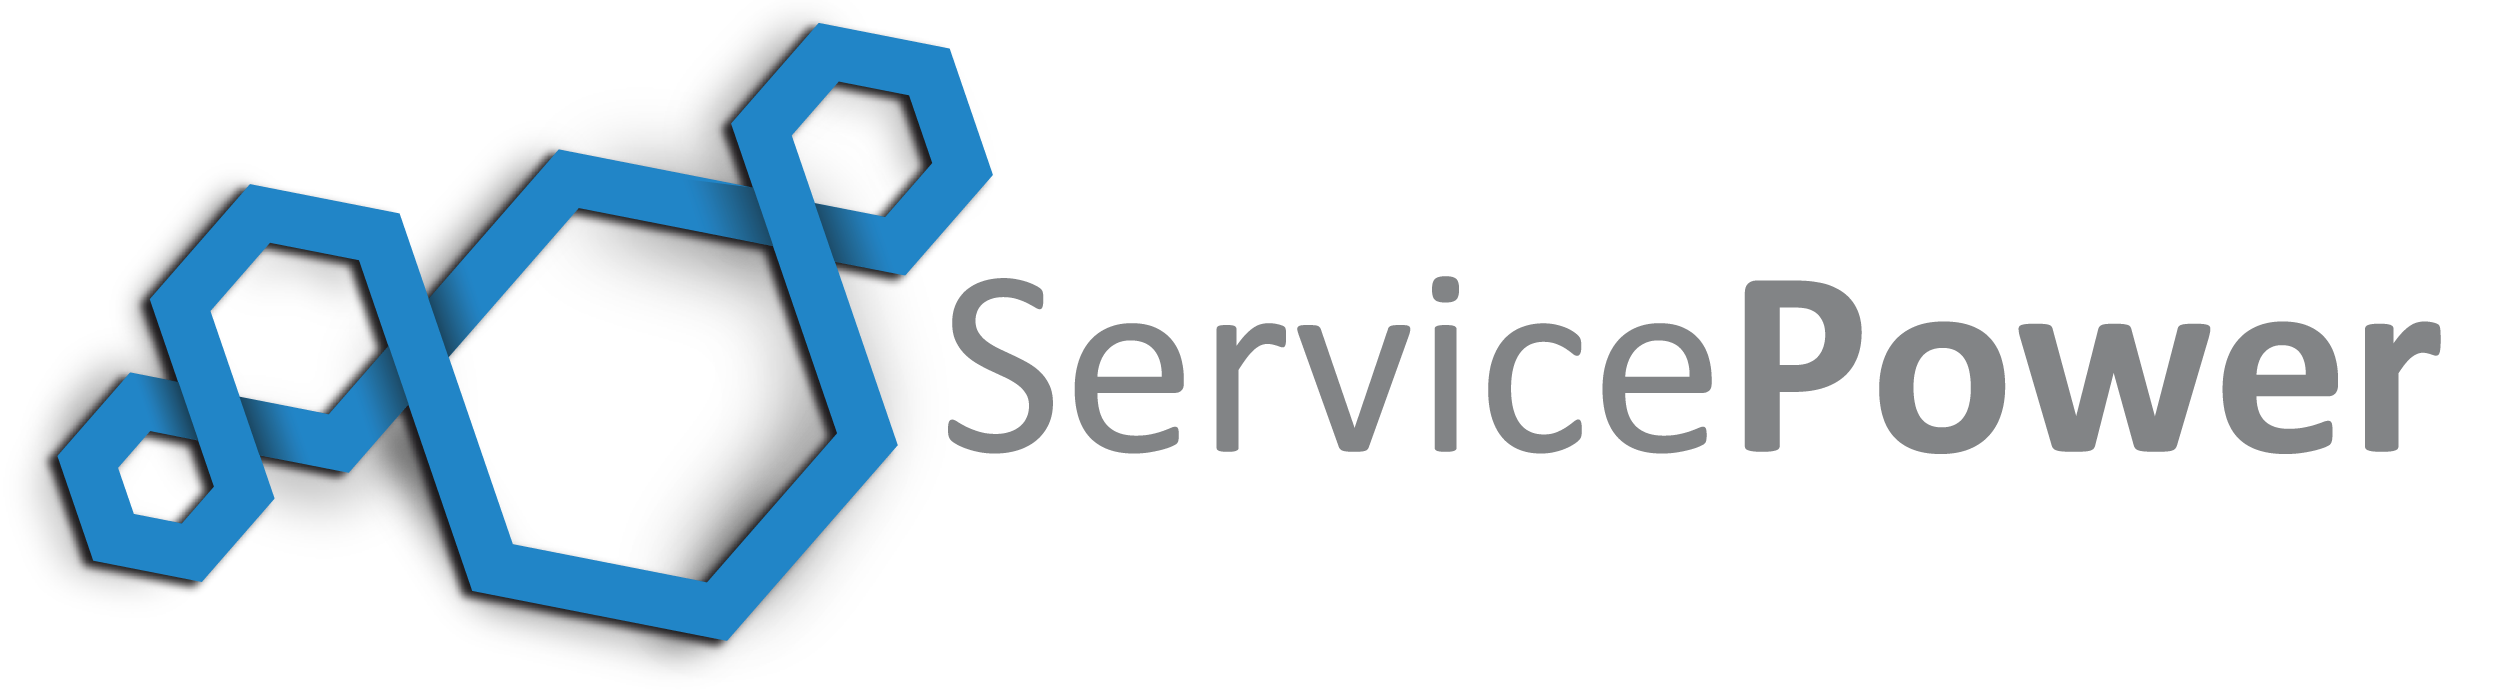 SERVICEPOWER users